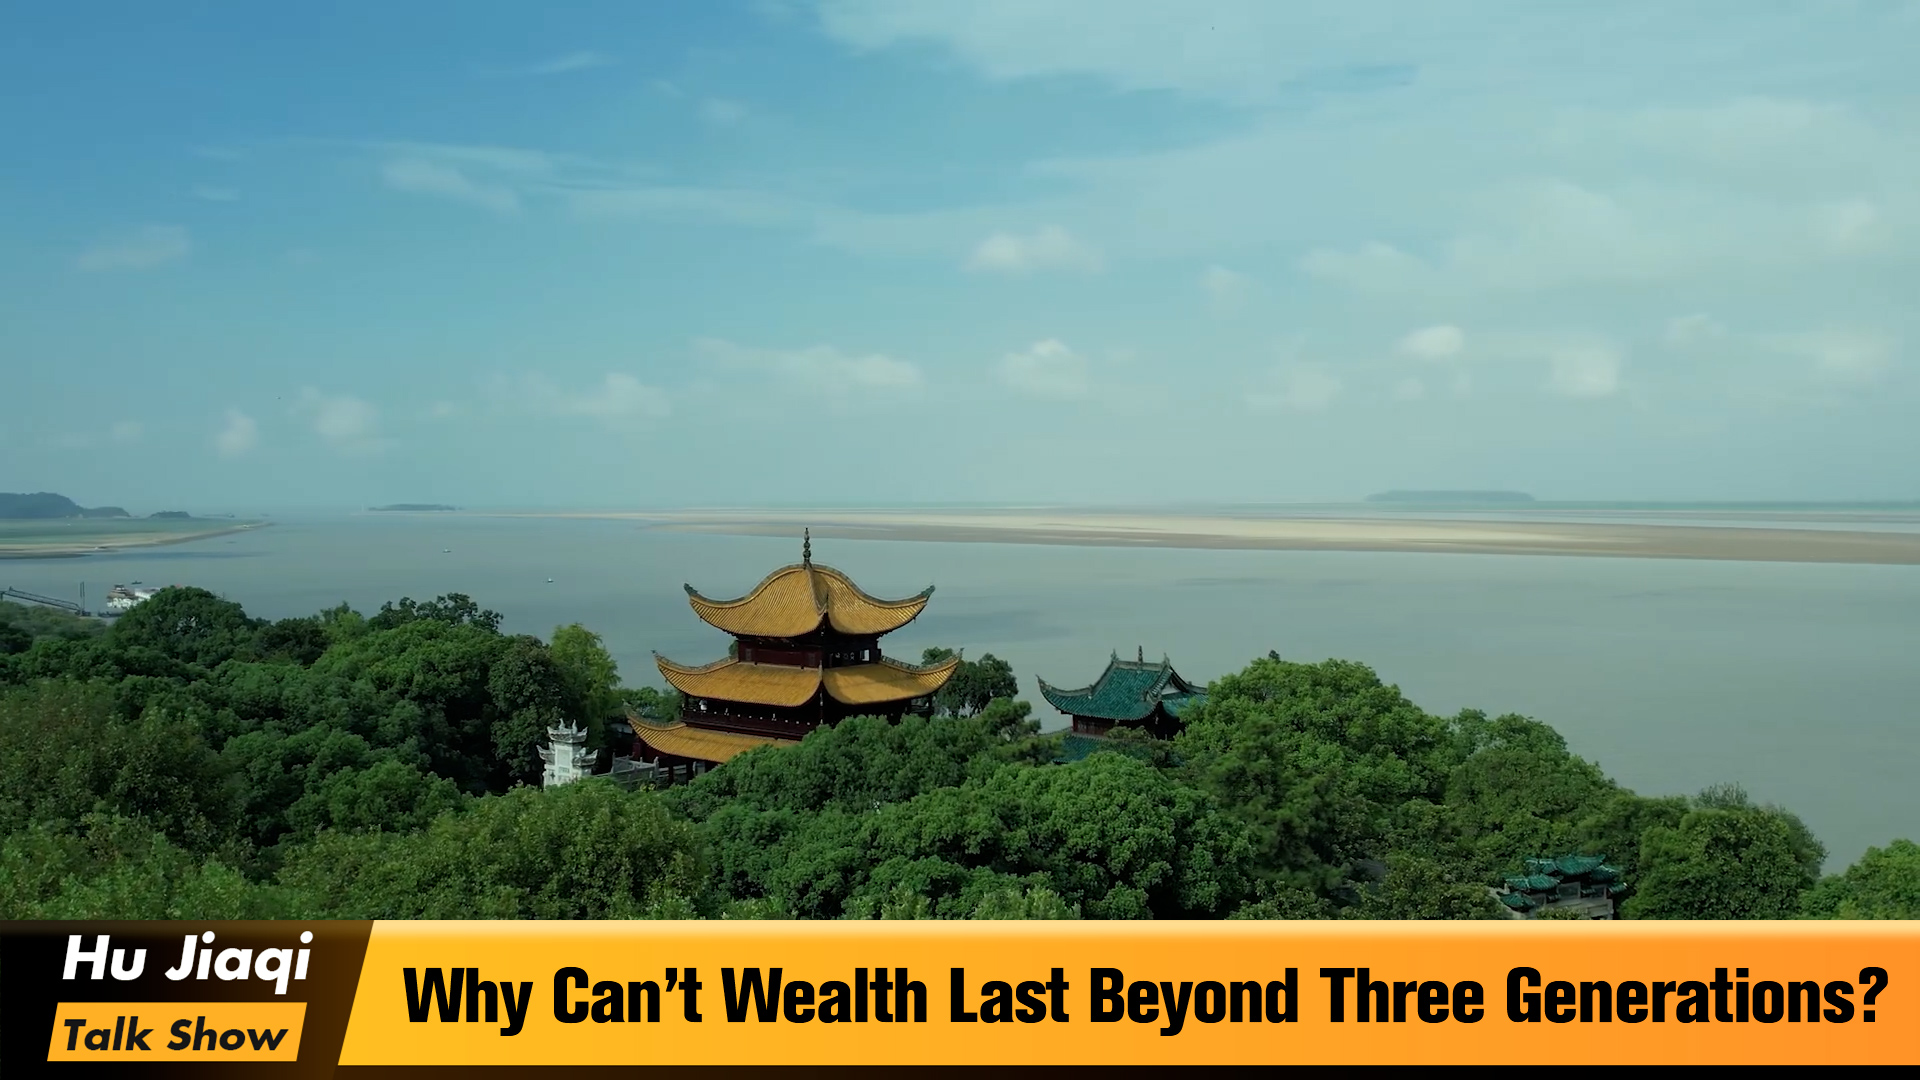 Why Can't Wealth Last Beyond Three Generations?